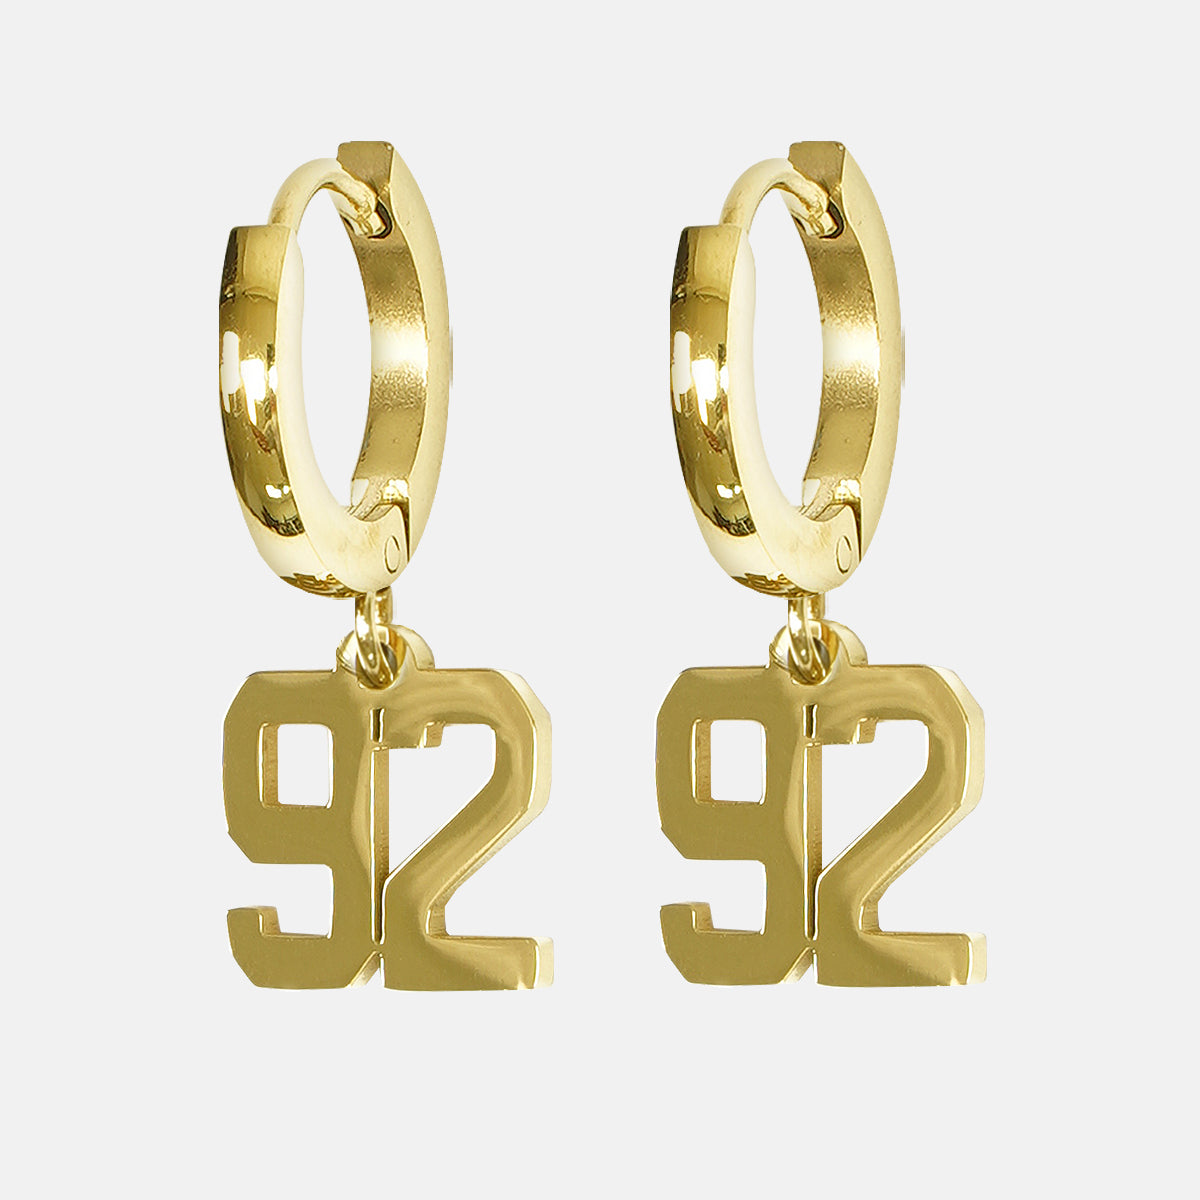 92 Number Earring - Gold Plated Stainless Steel